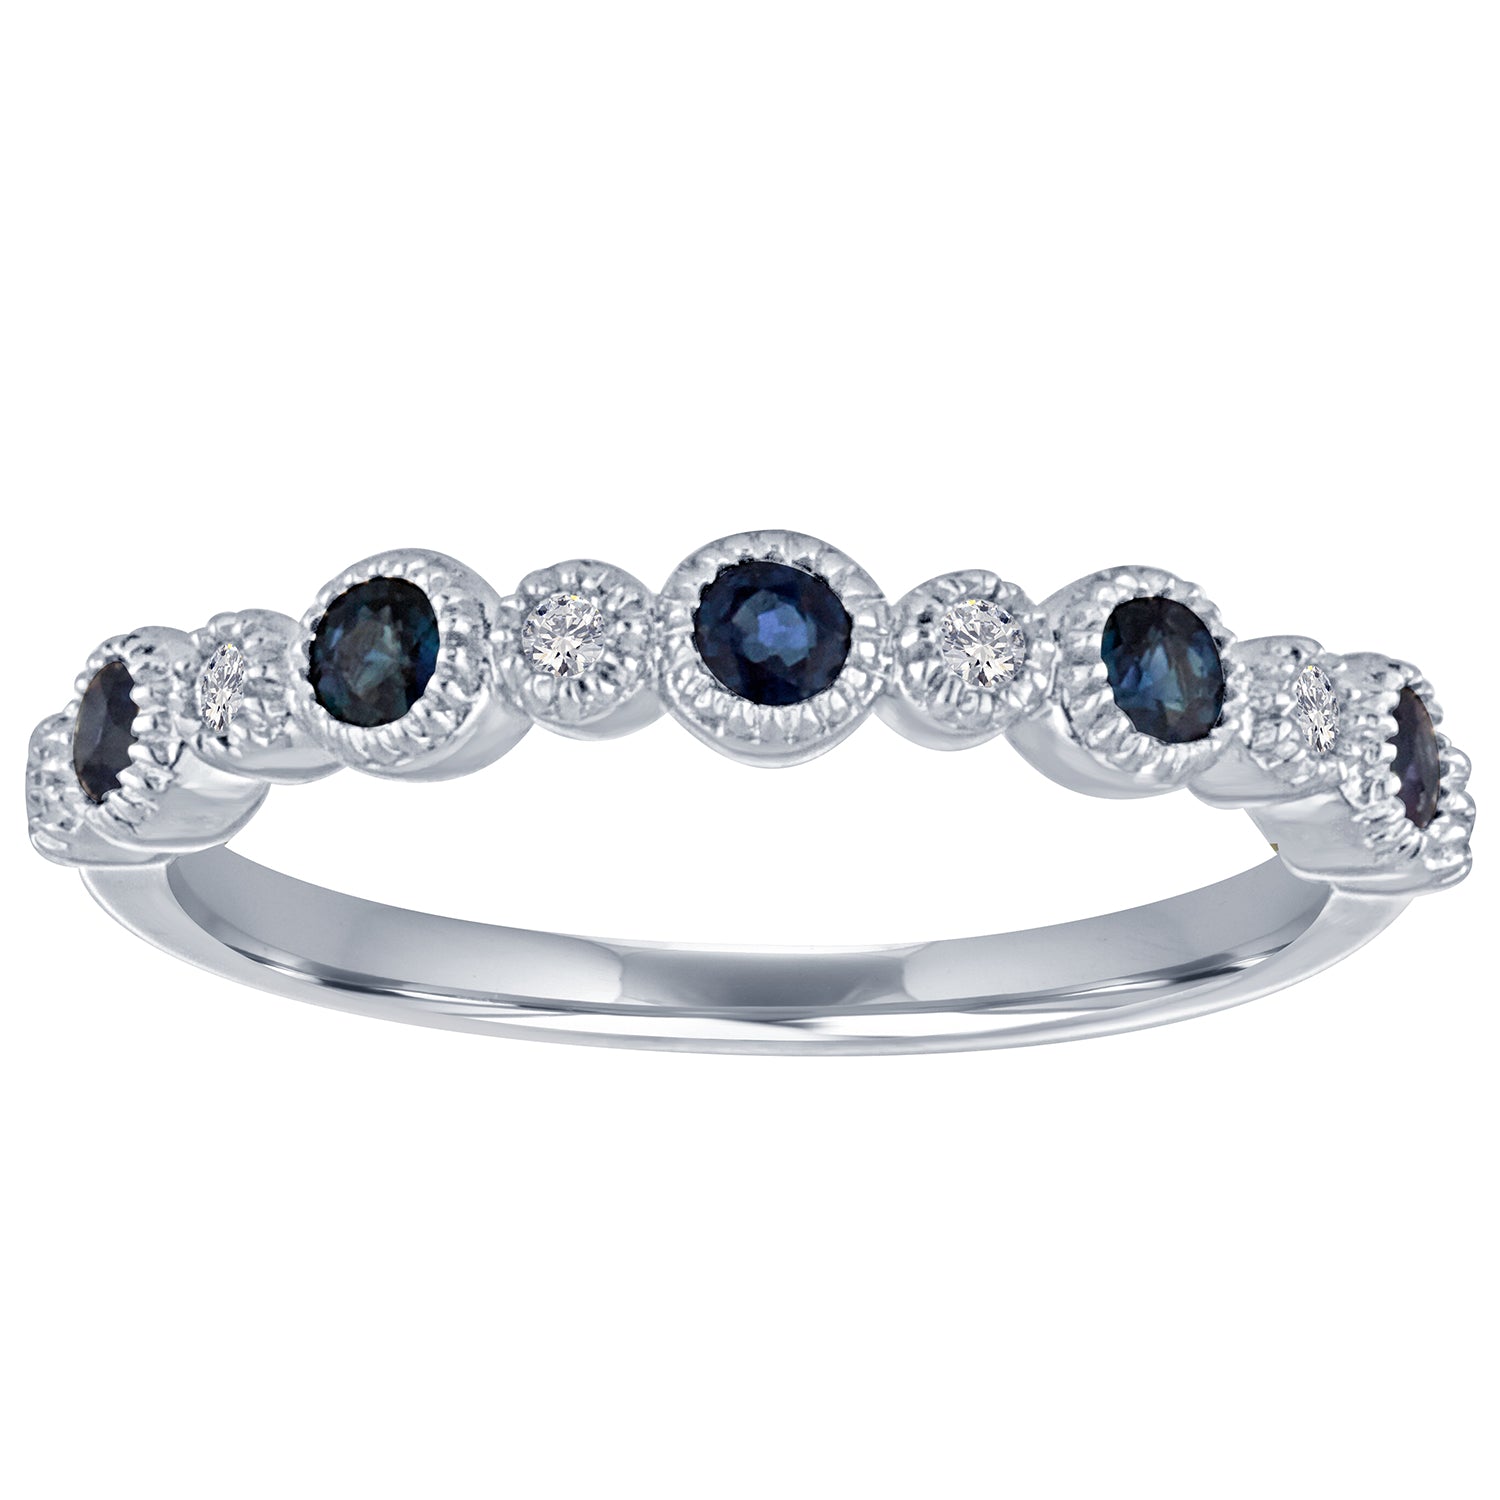 White gold skinny band with large round blue sapphires and small round diamonds.